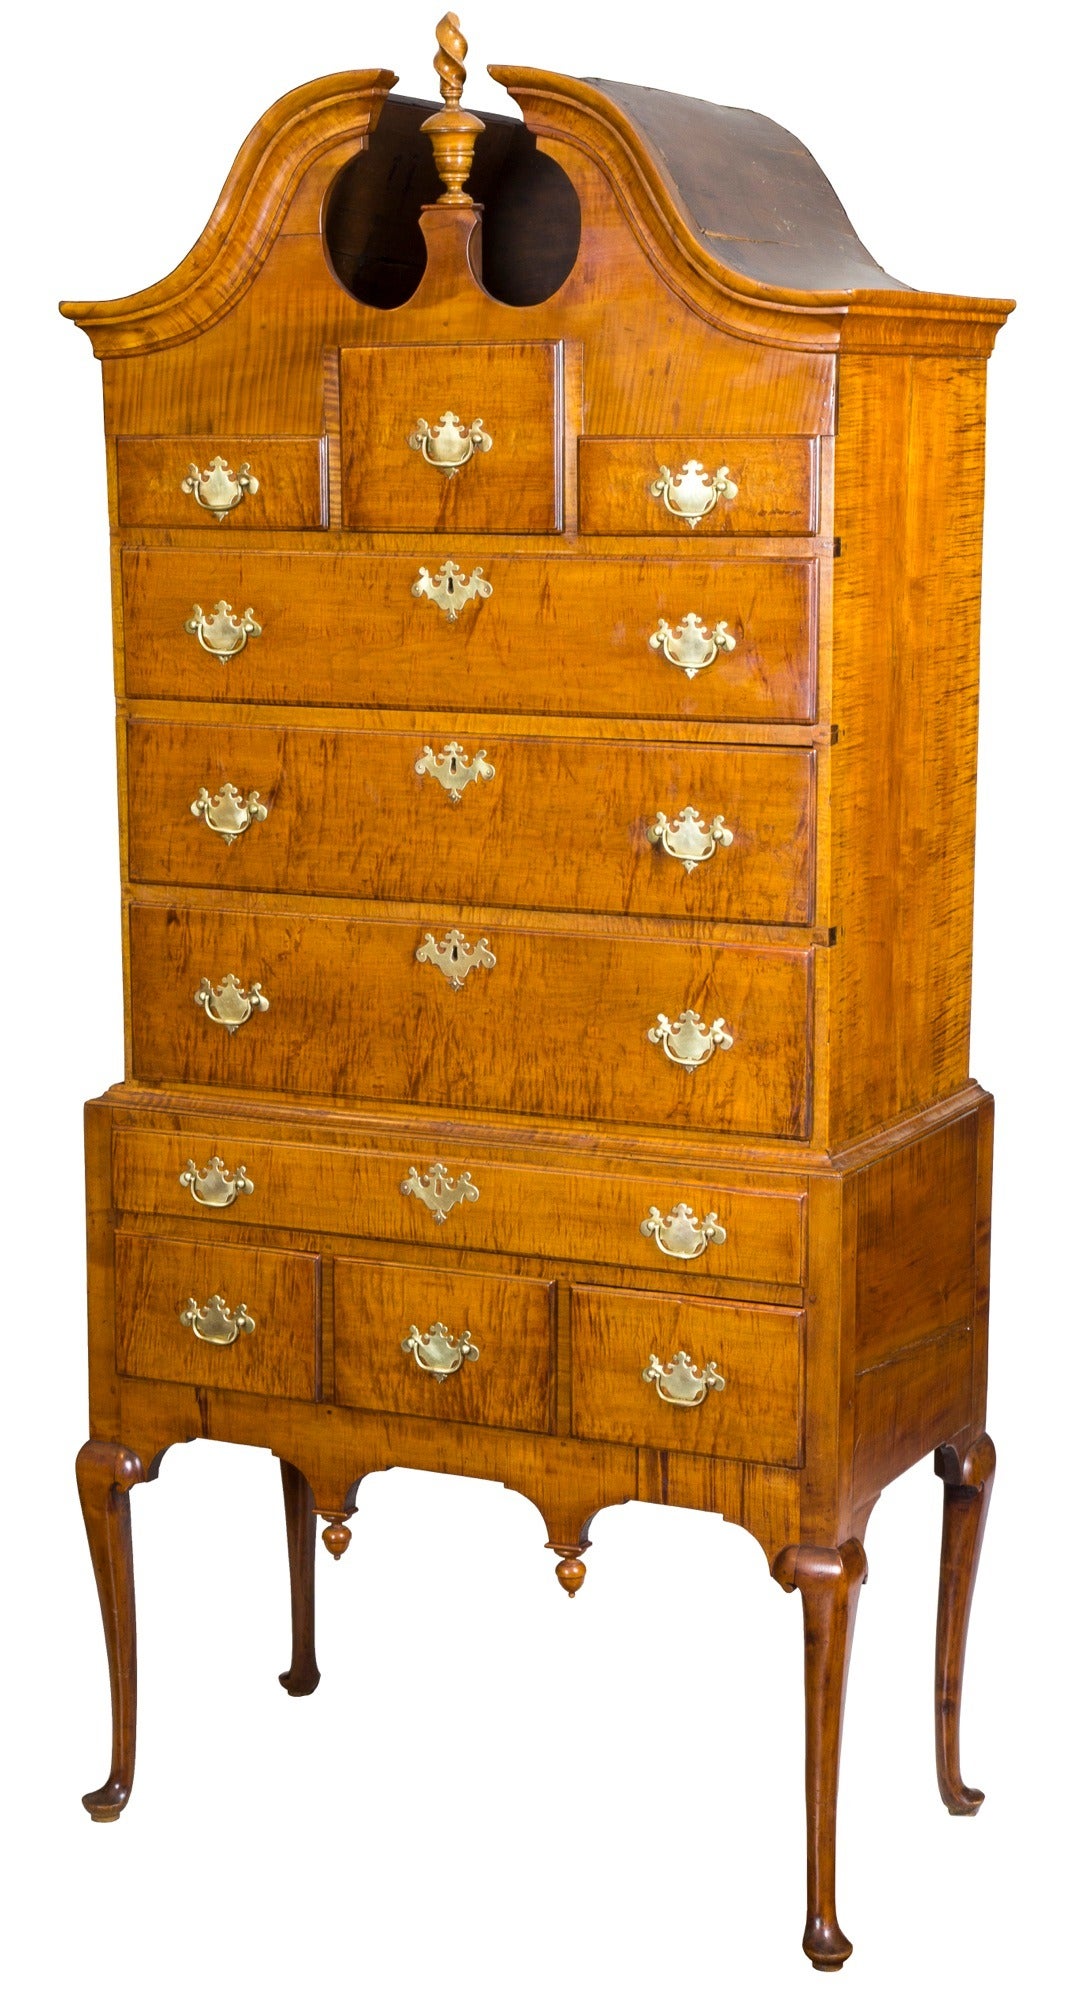 This highboy is of a small-scale with a width of only 35 in. and has a very delicate, fine appearance, with a beautifully formed pediment, which flanks its original urn and finial. While this form exists, finding one in tiger maple with a glorious